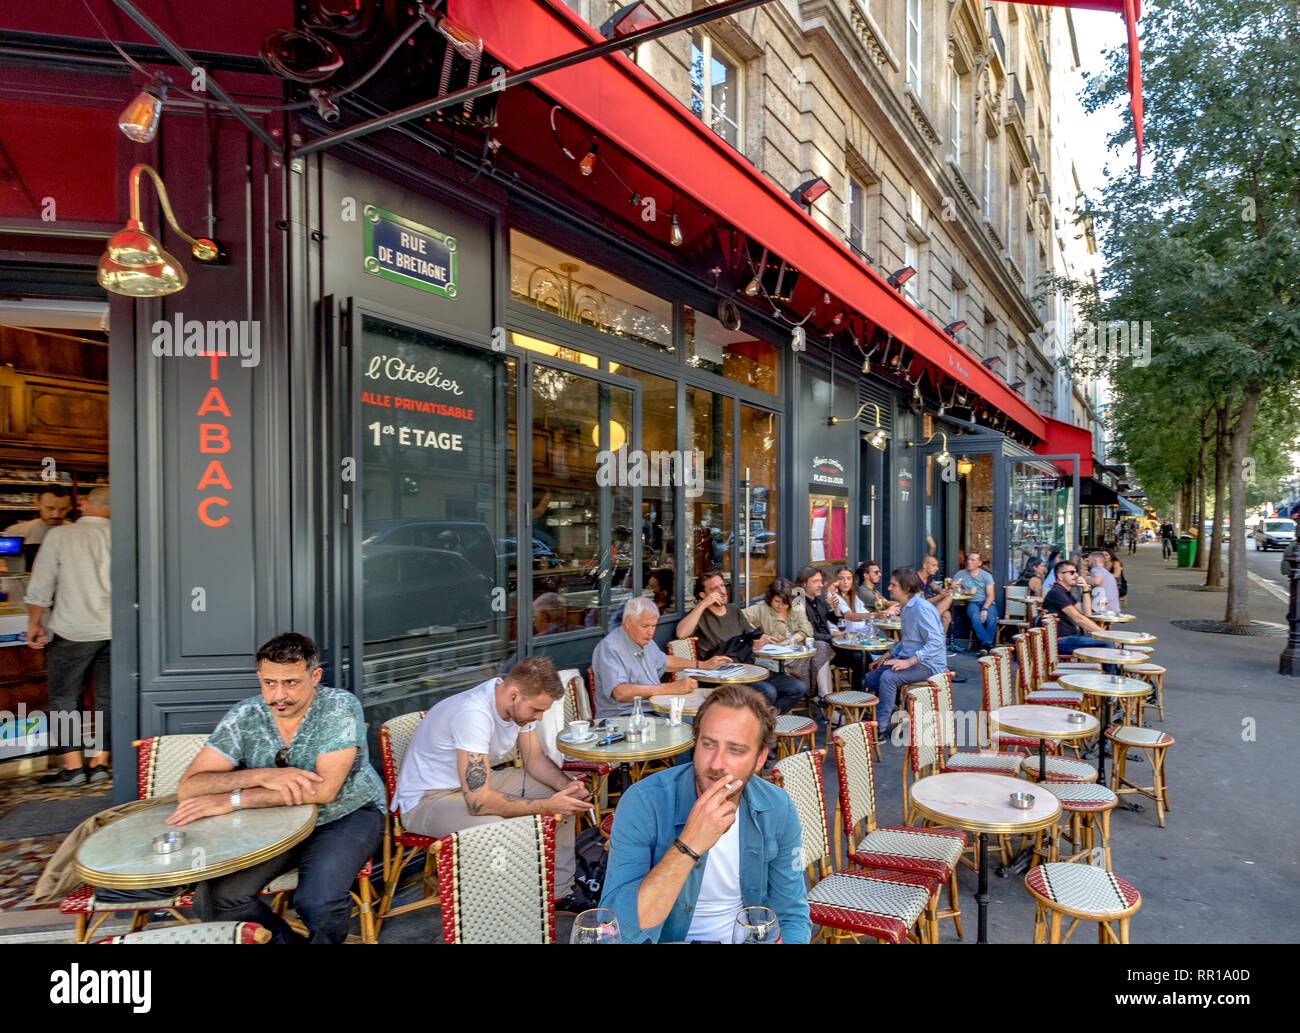 A man smoking a cigarette sitting outside on the pavement at a restaurant cafe in Rue de Bretagne, Paris, France Stock Photo